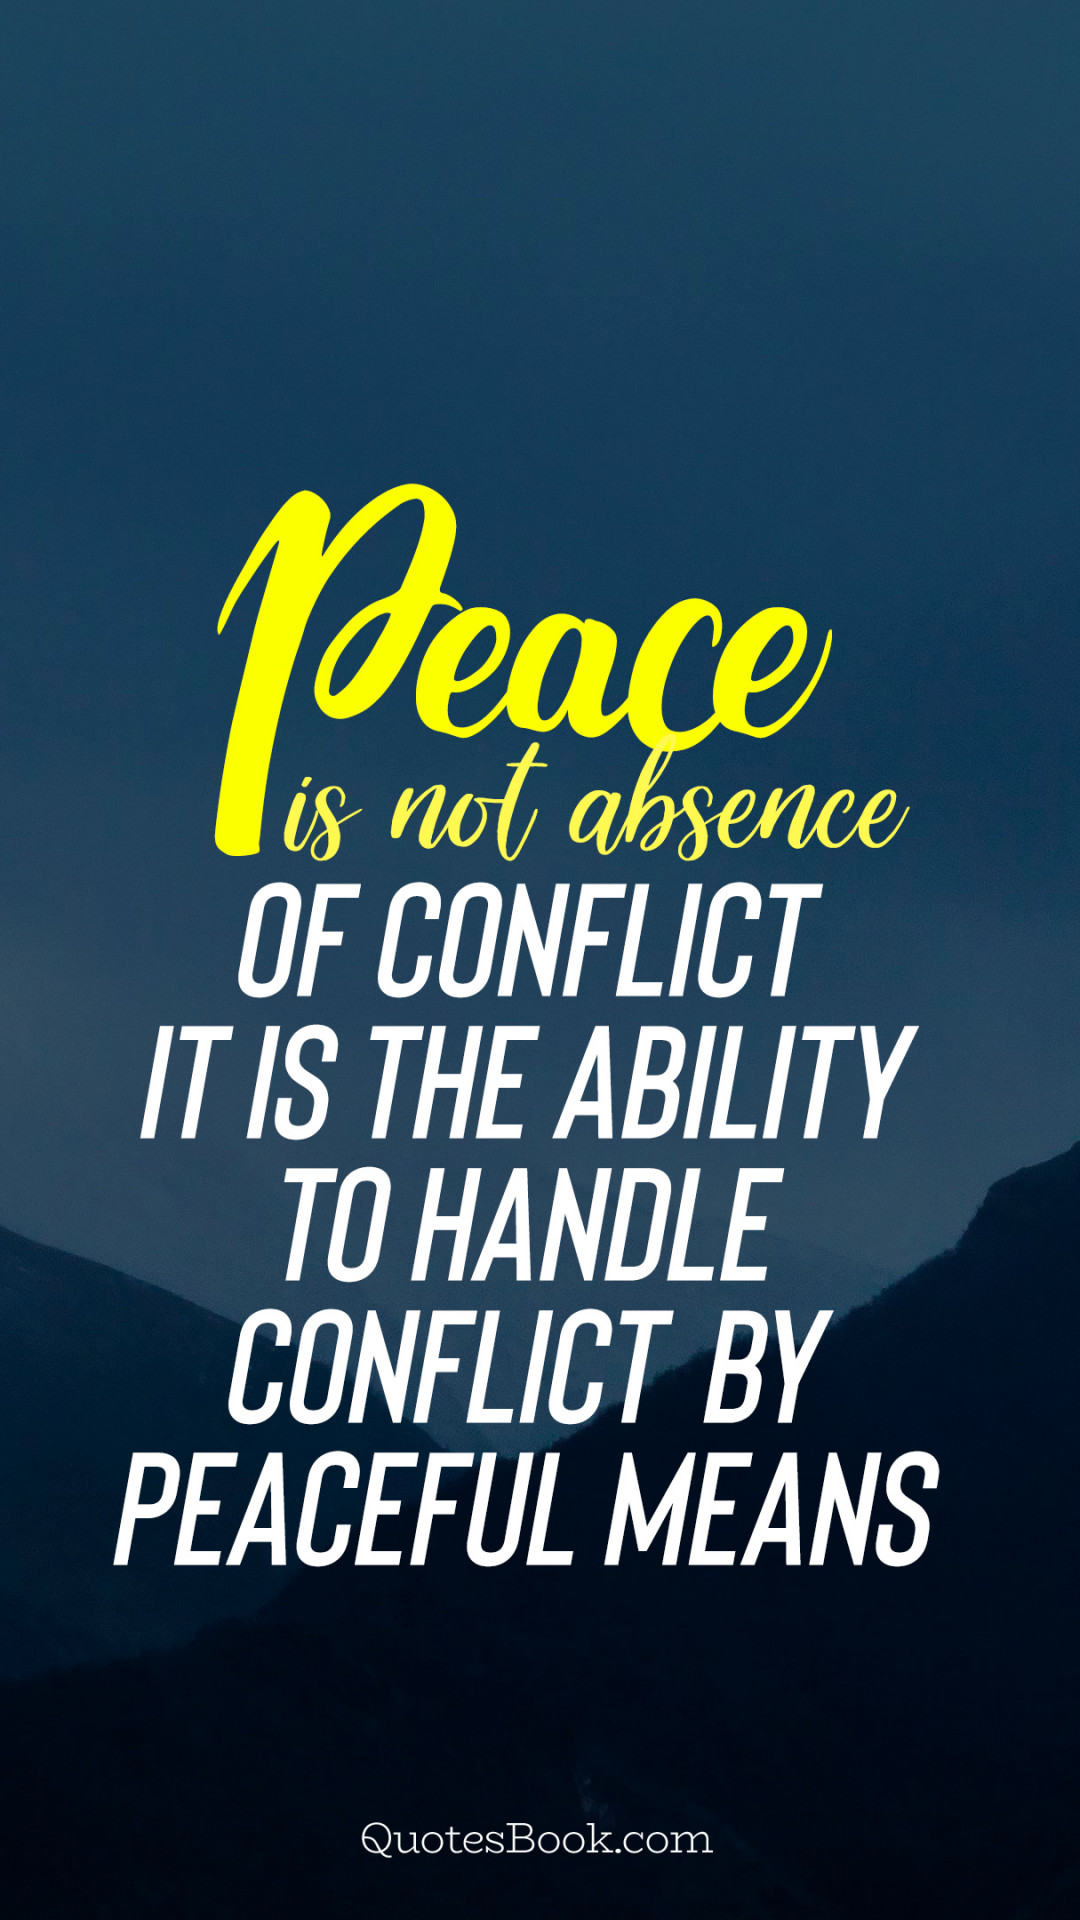 Peace is not absence of conflict it is the ability to handle conflict